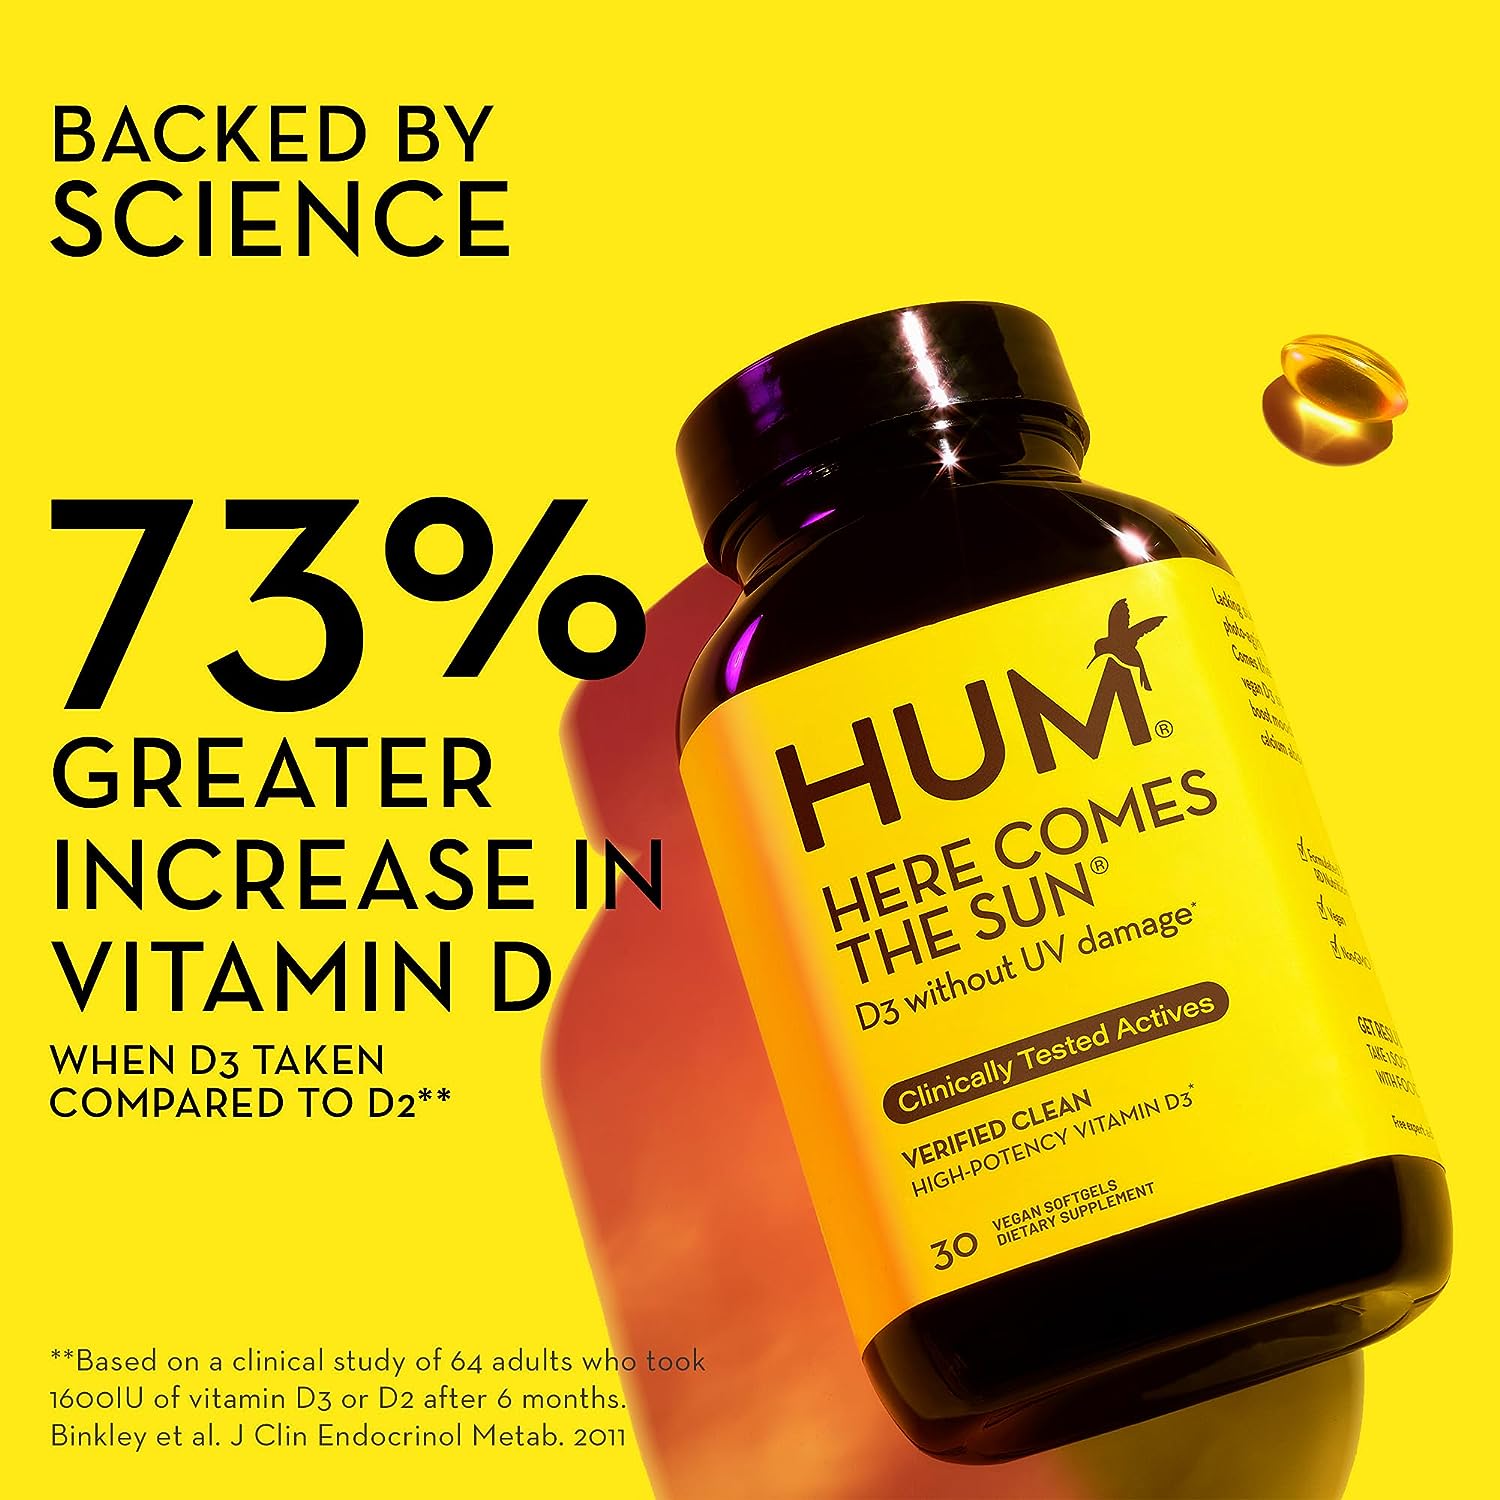 HUM Here Comes The Sun - Immune Supplement with Vitamin D & Calcium fo